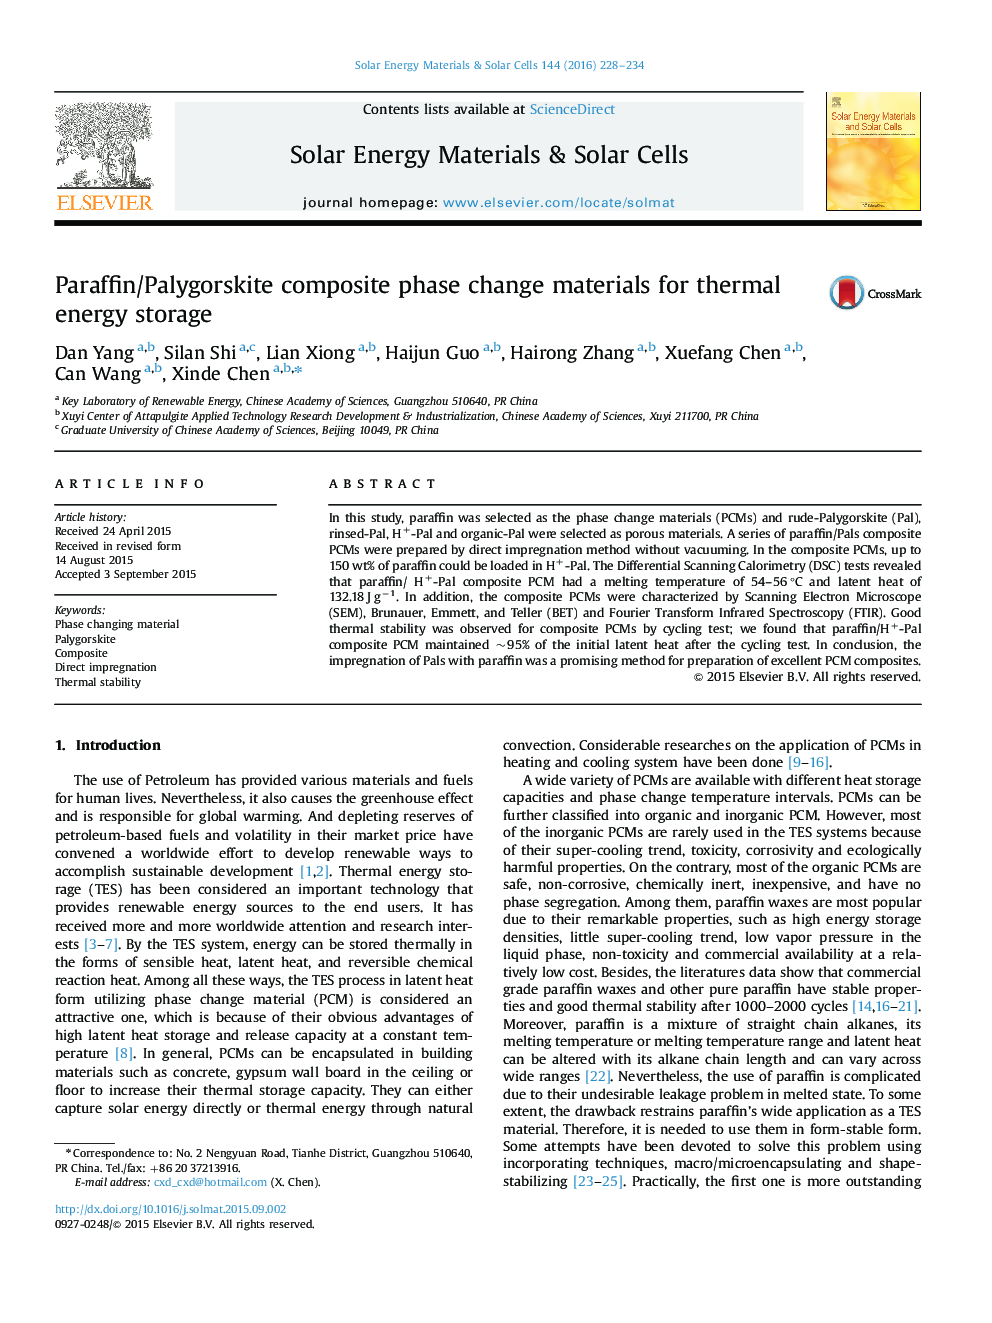 Paraffin/Palygorskite composite phase change materials for thermal energy storage